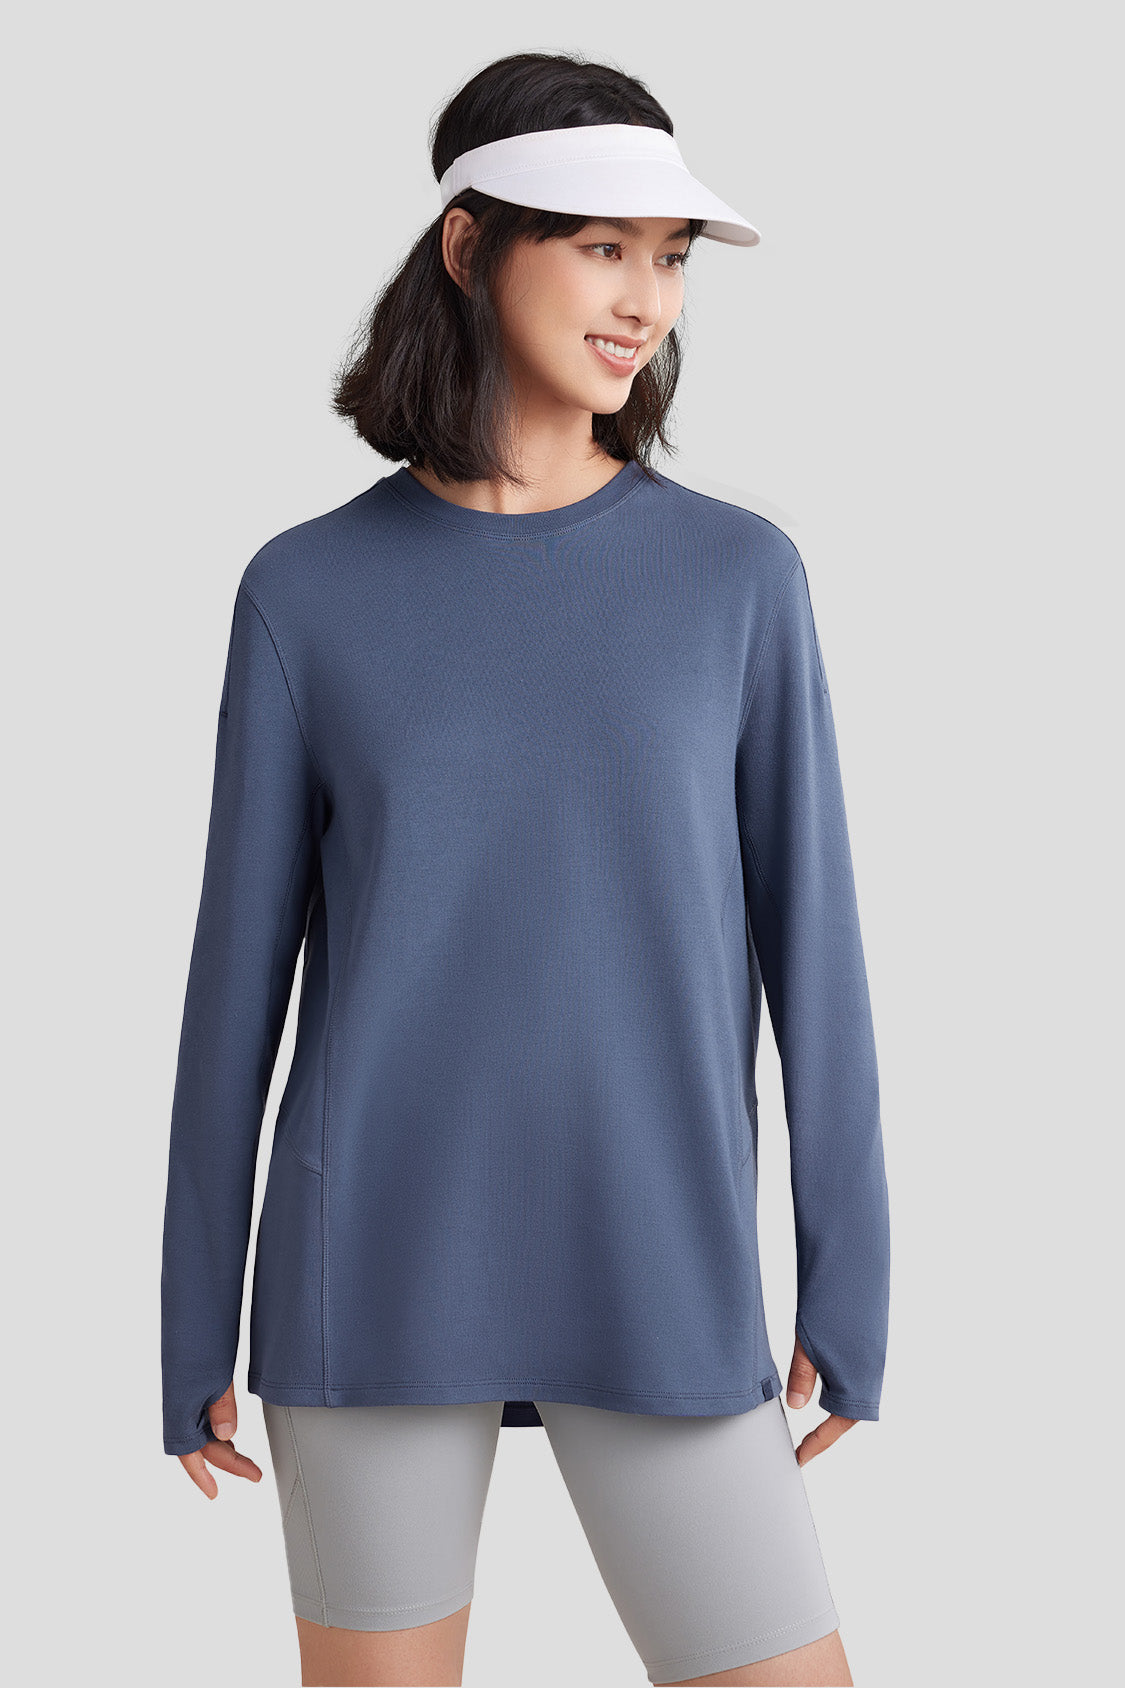 Women's Oversized Double Layer Elastic Cotton Long Sleeves